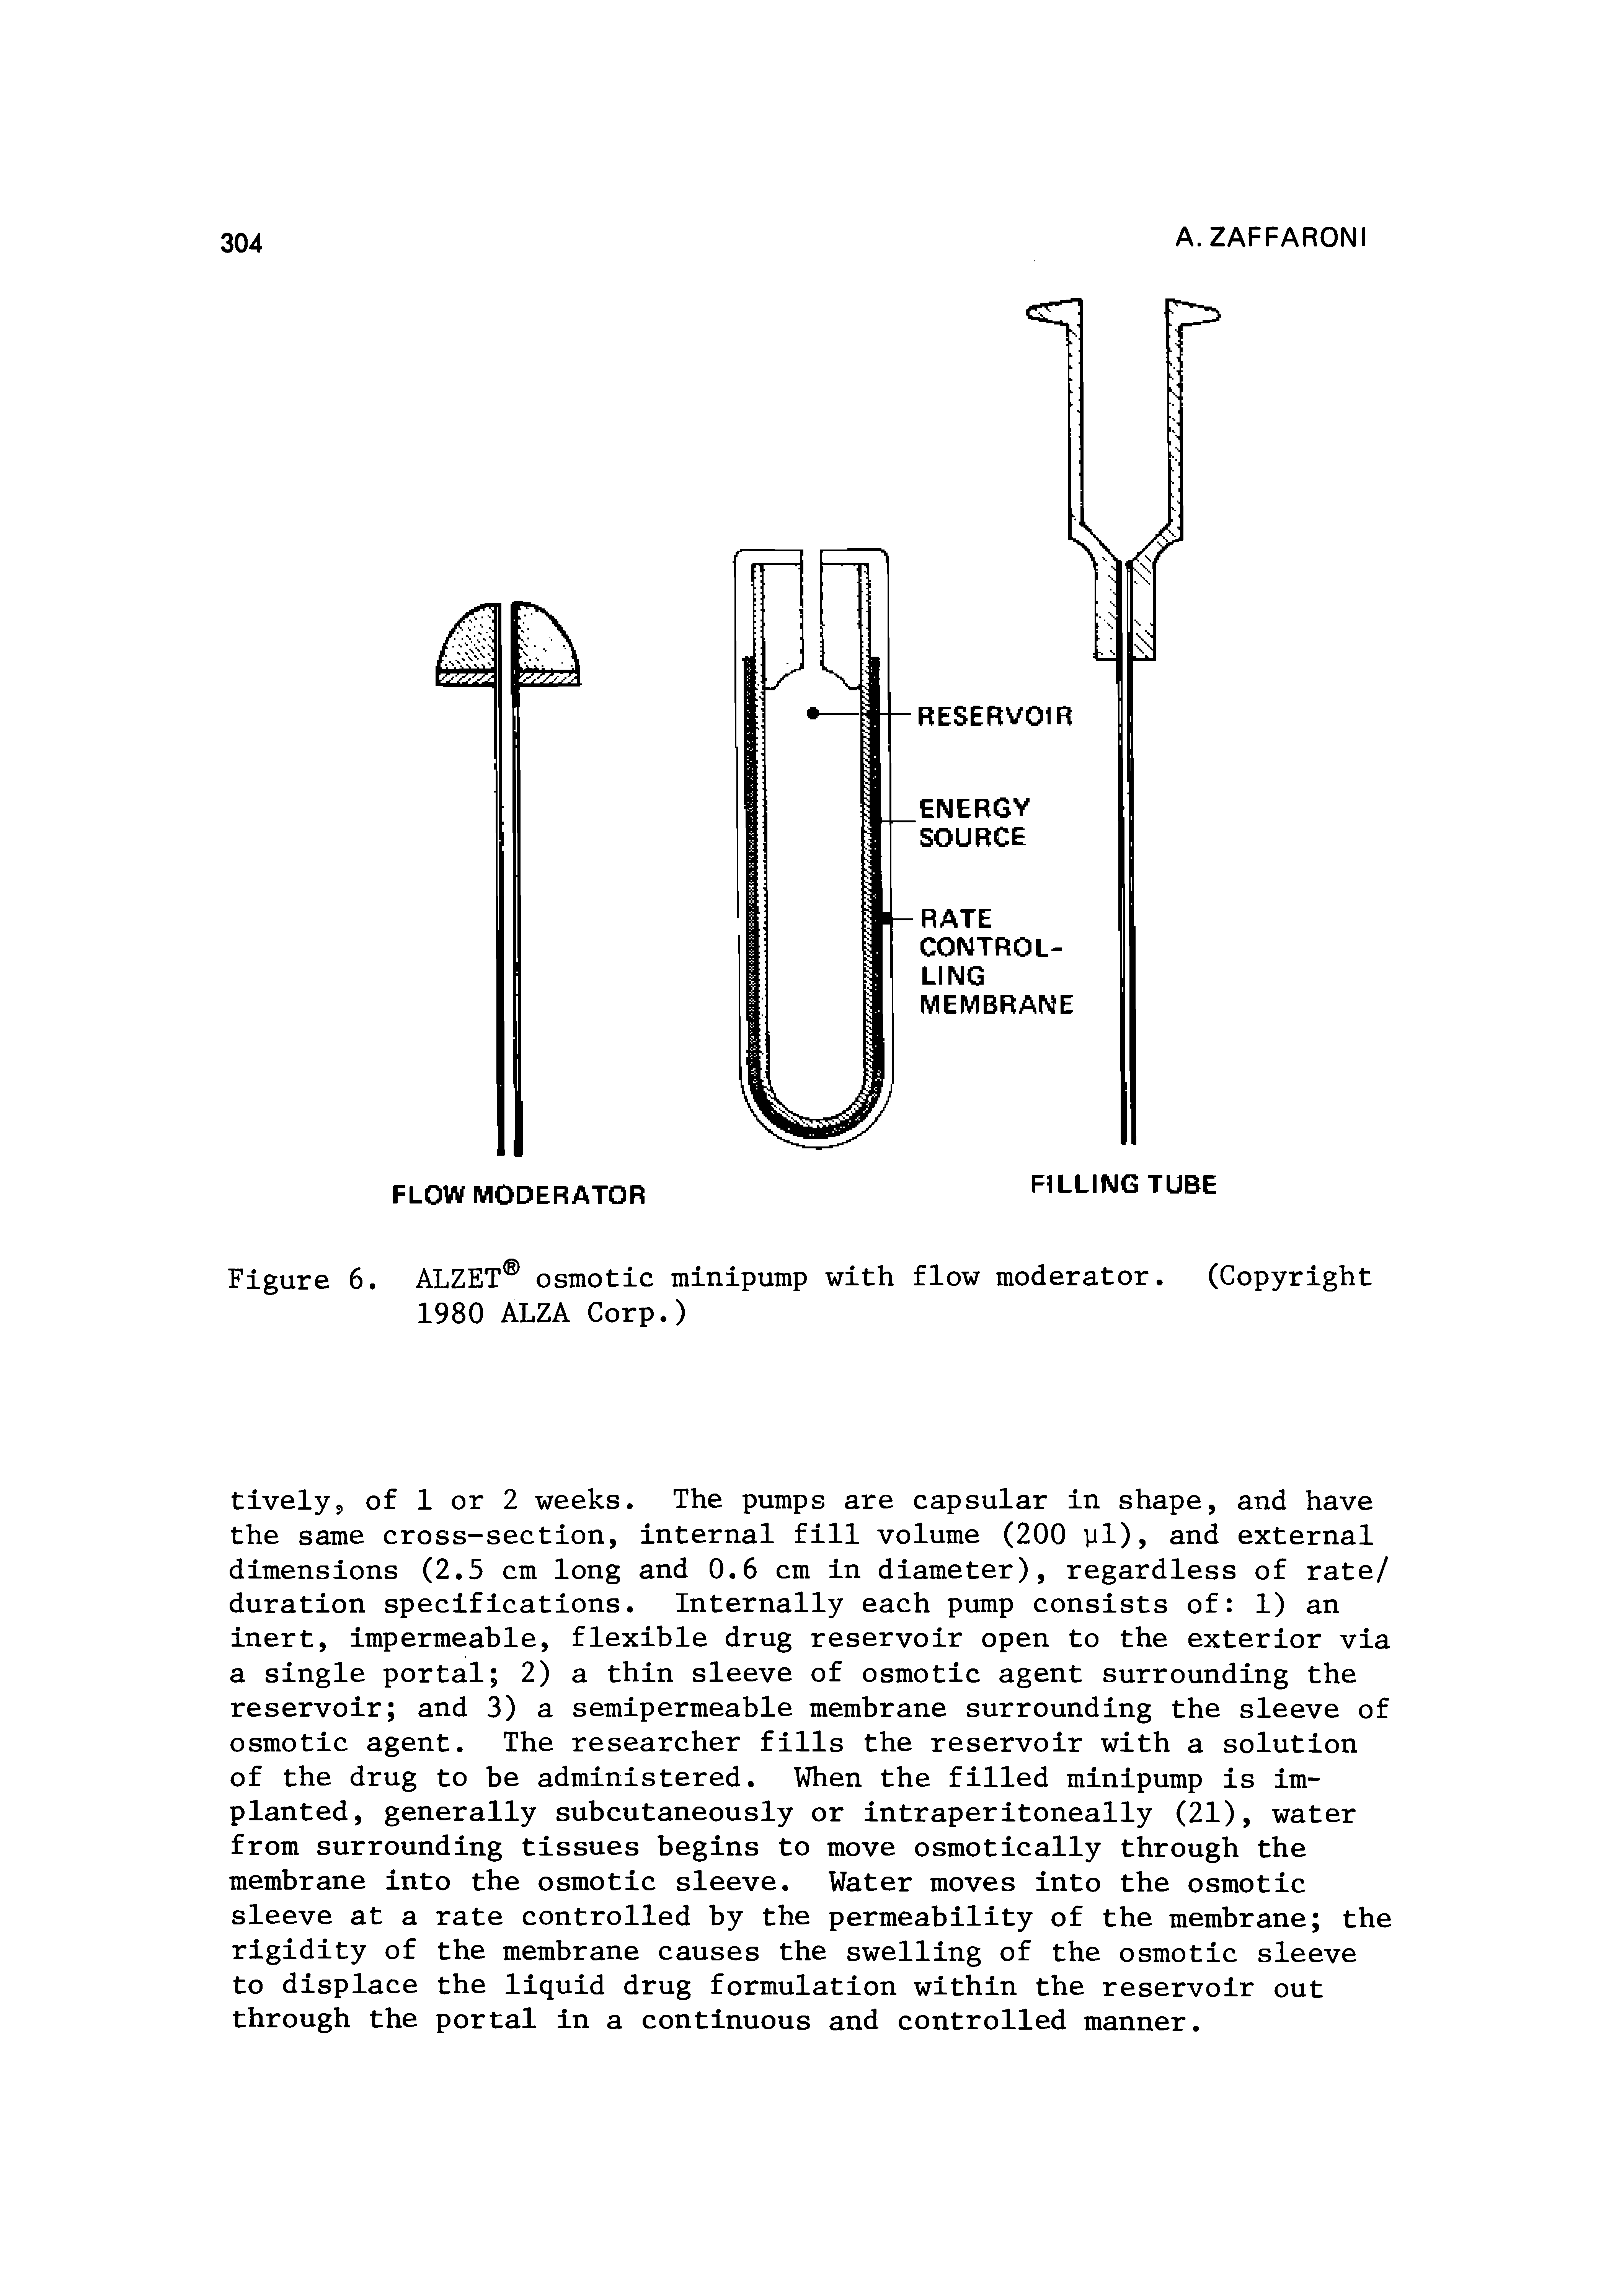 Figure 6. ALZET osmotic minipump with flow moderator. (Copyright 1980 ALZA Corp.)...